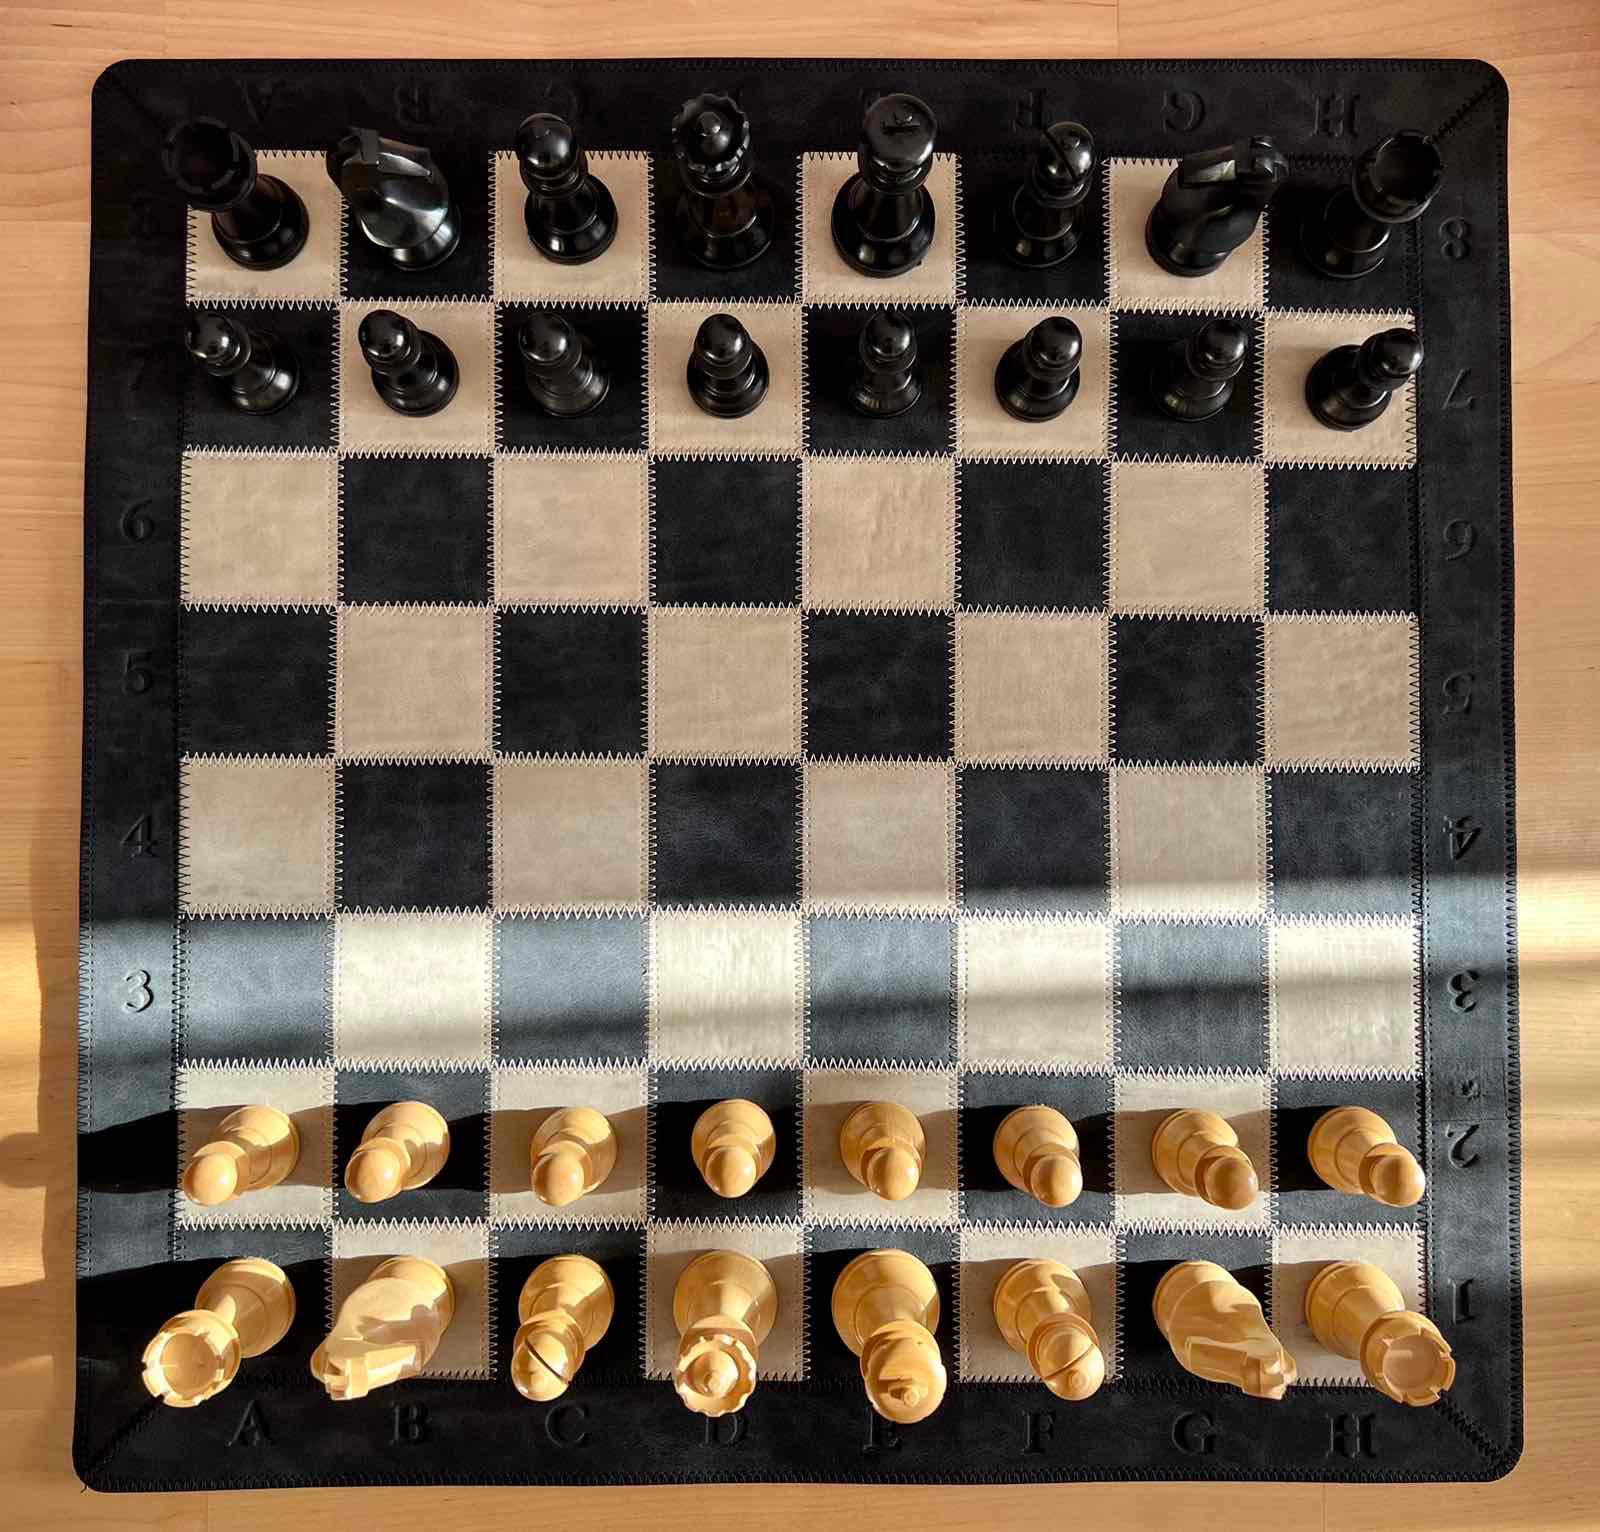 value tournament chess set-filled chess pieces